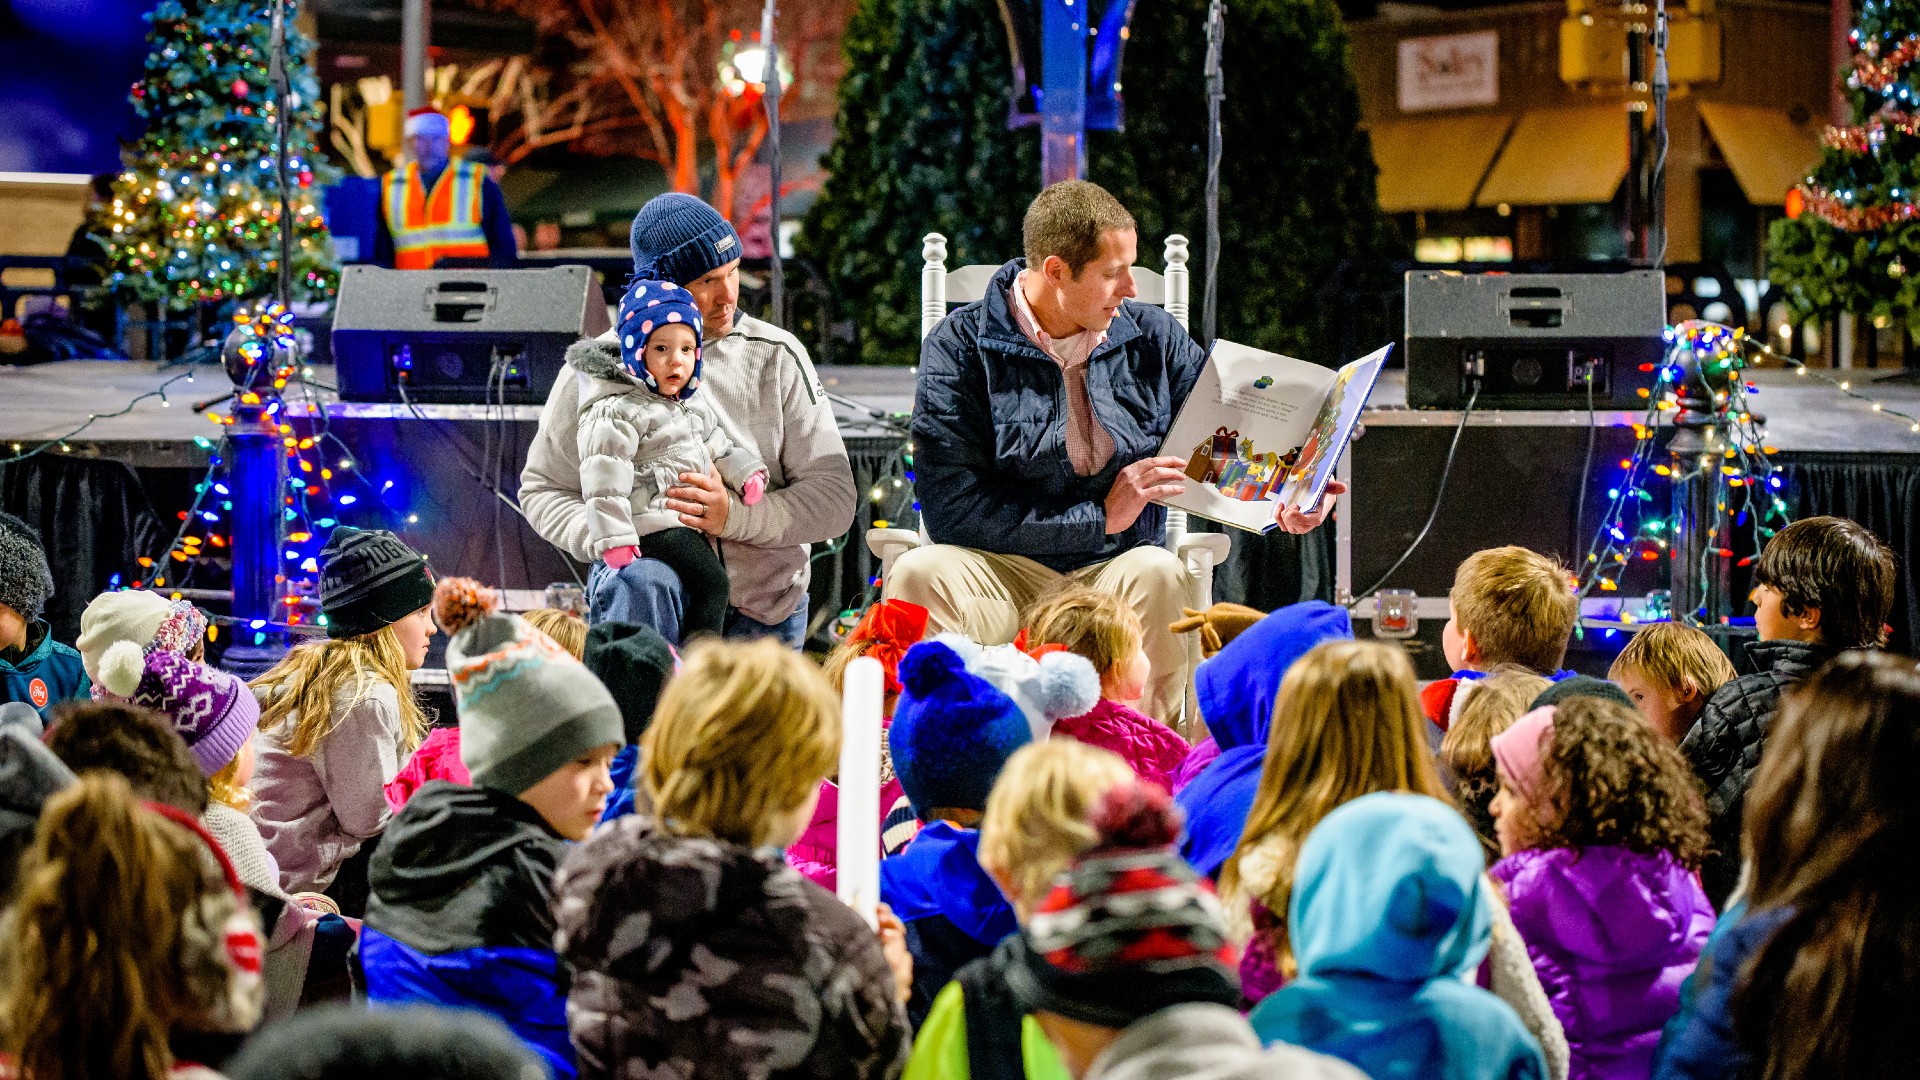 Two men read a book to a crowd of children during the Christmas season.